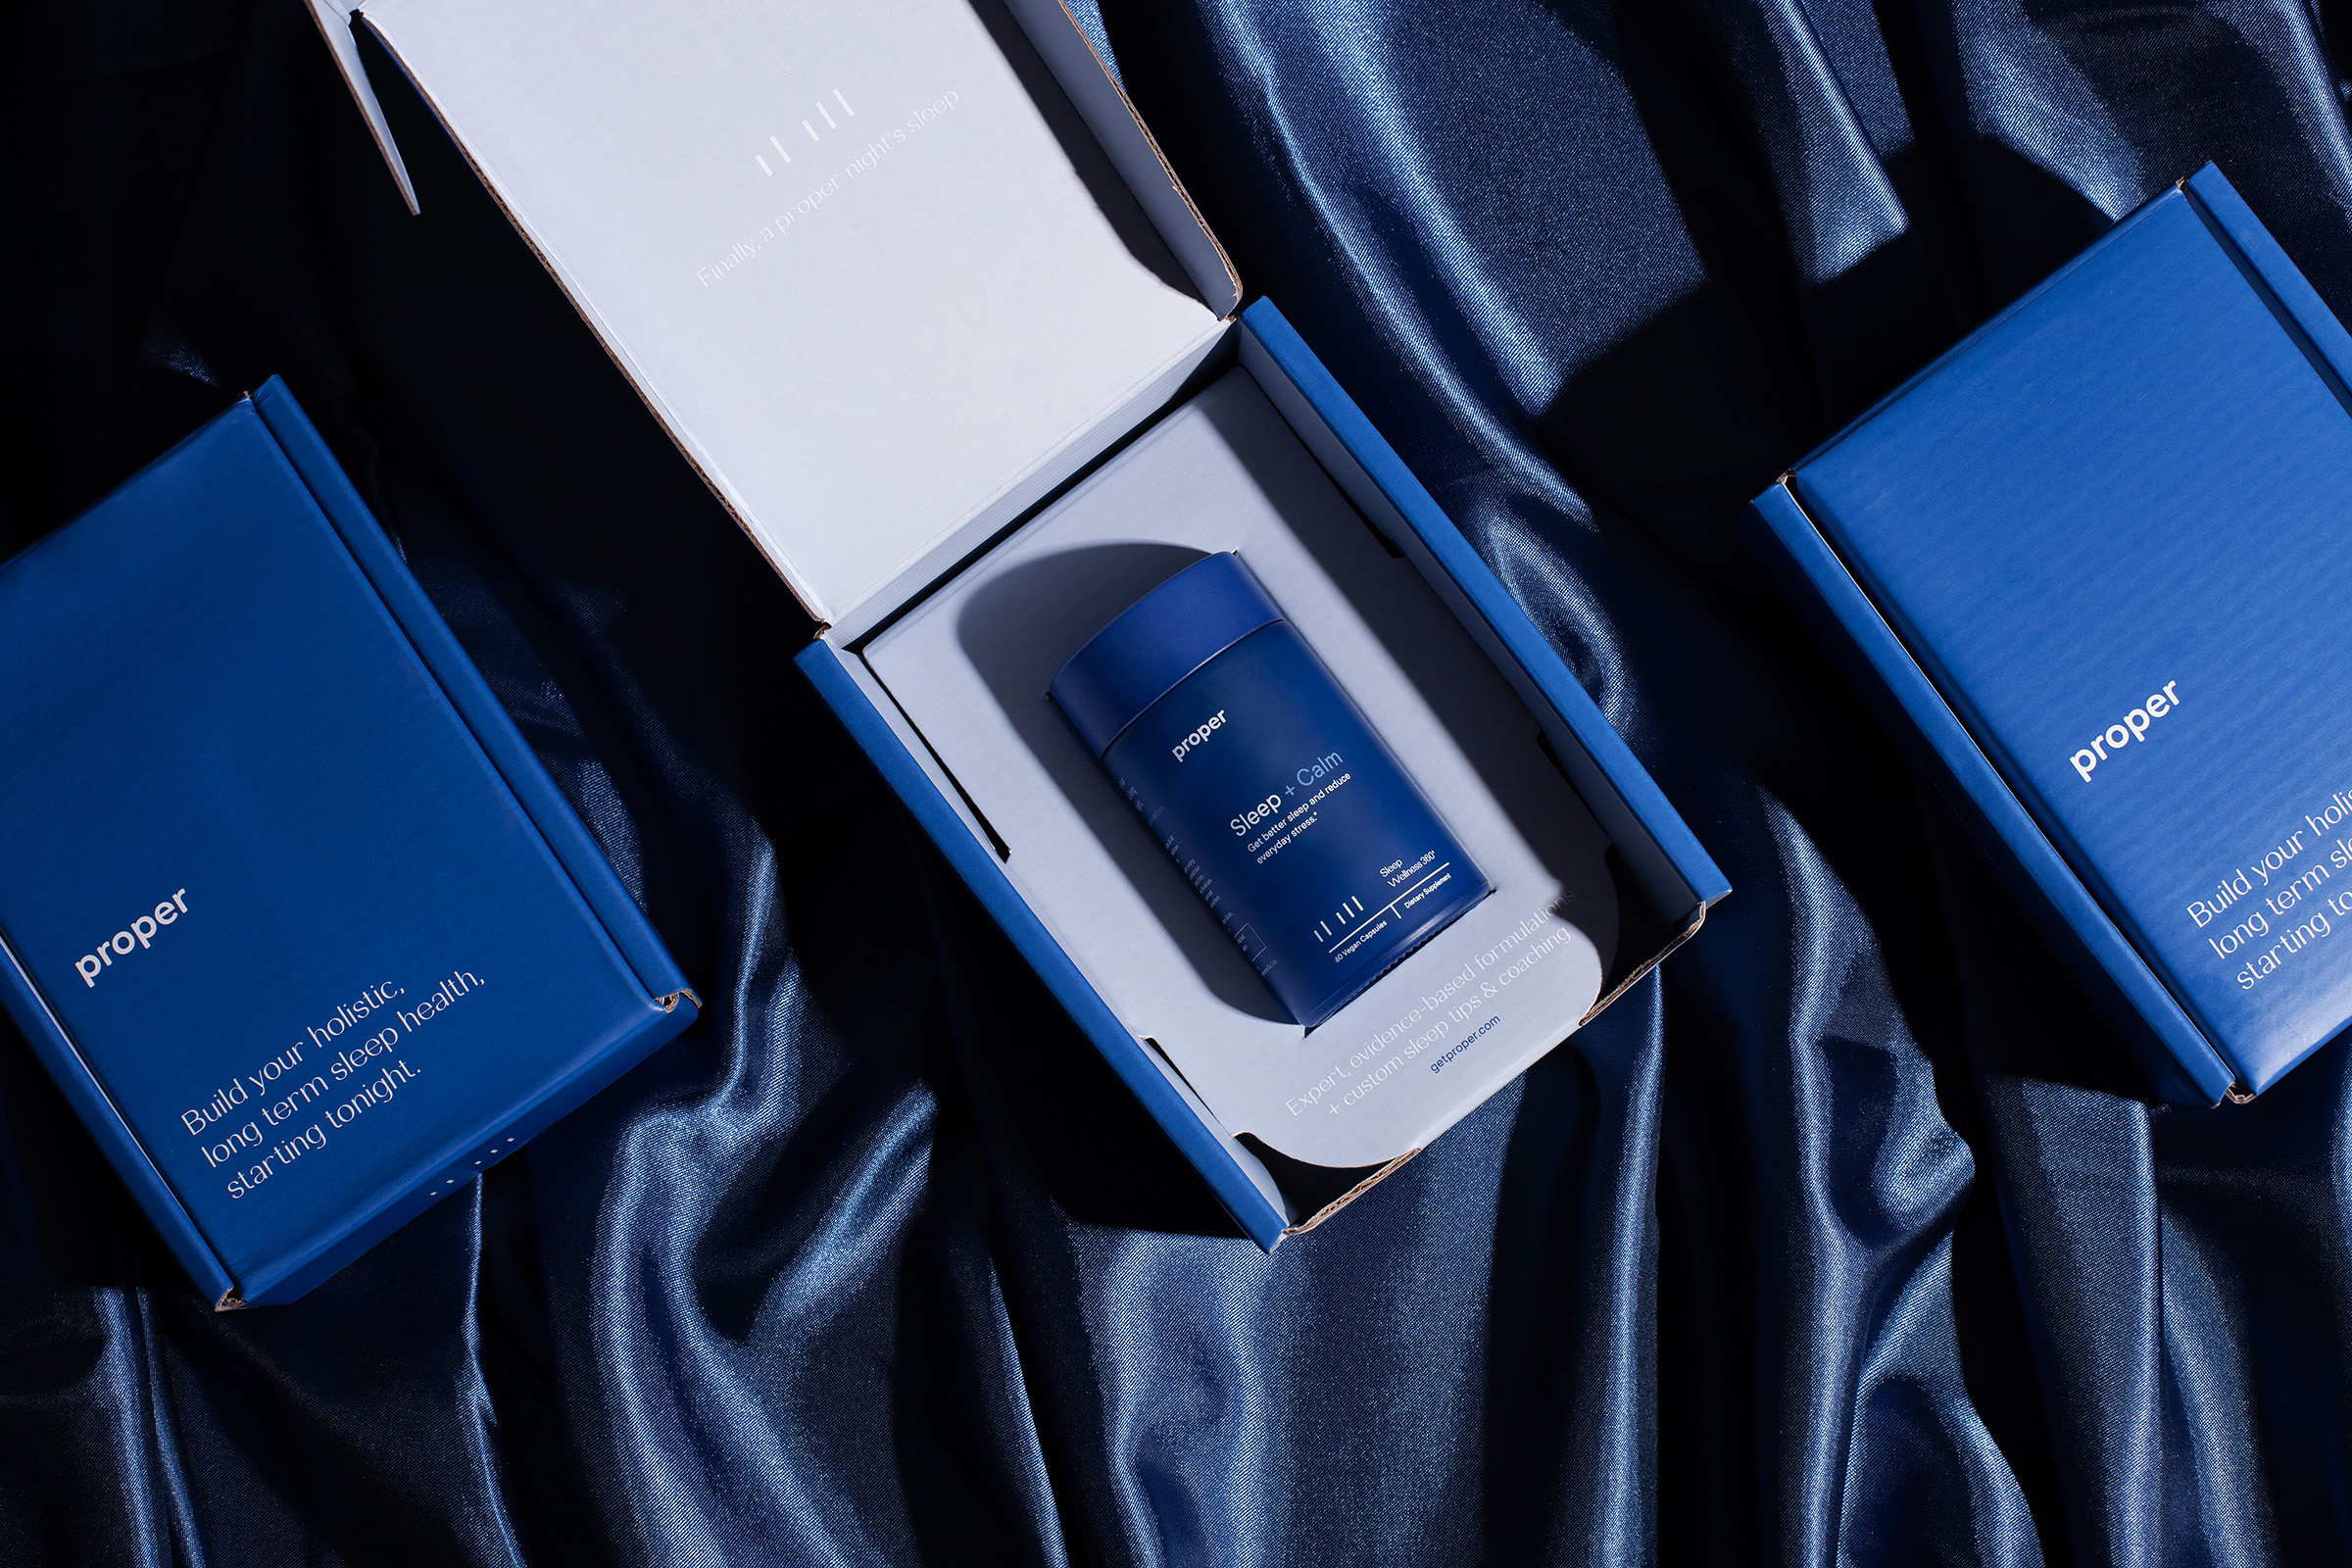 Proper Branding and Packaging Design by Unspoken Agreement